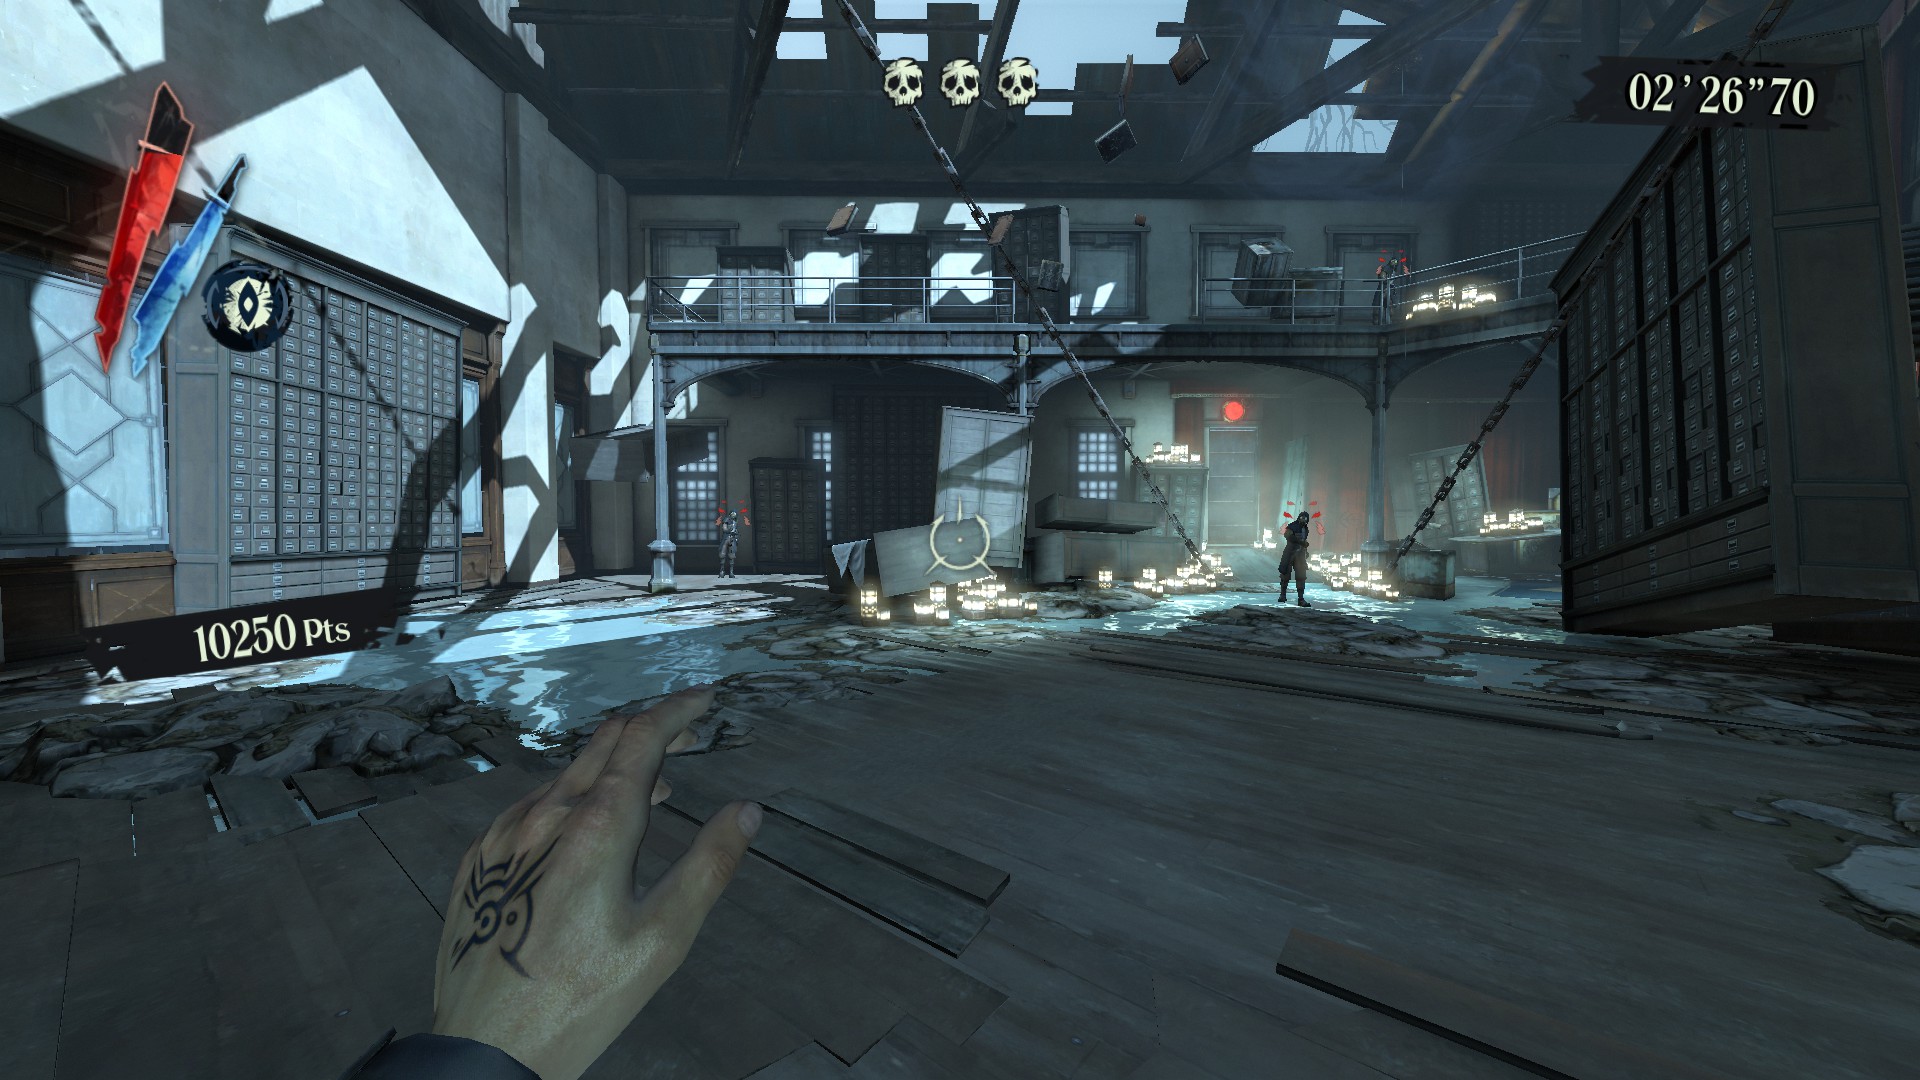 Dishonored - Obtaining Headhunter Achievement Guide - Room 7: 3 Whalers - 75BB0DE